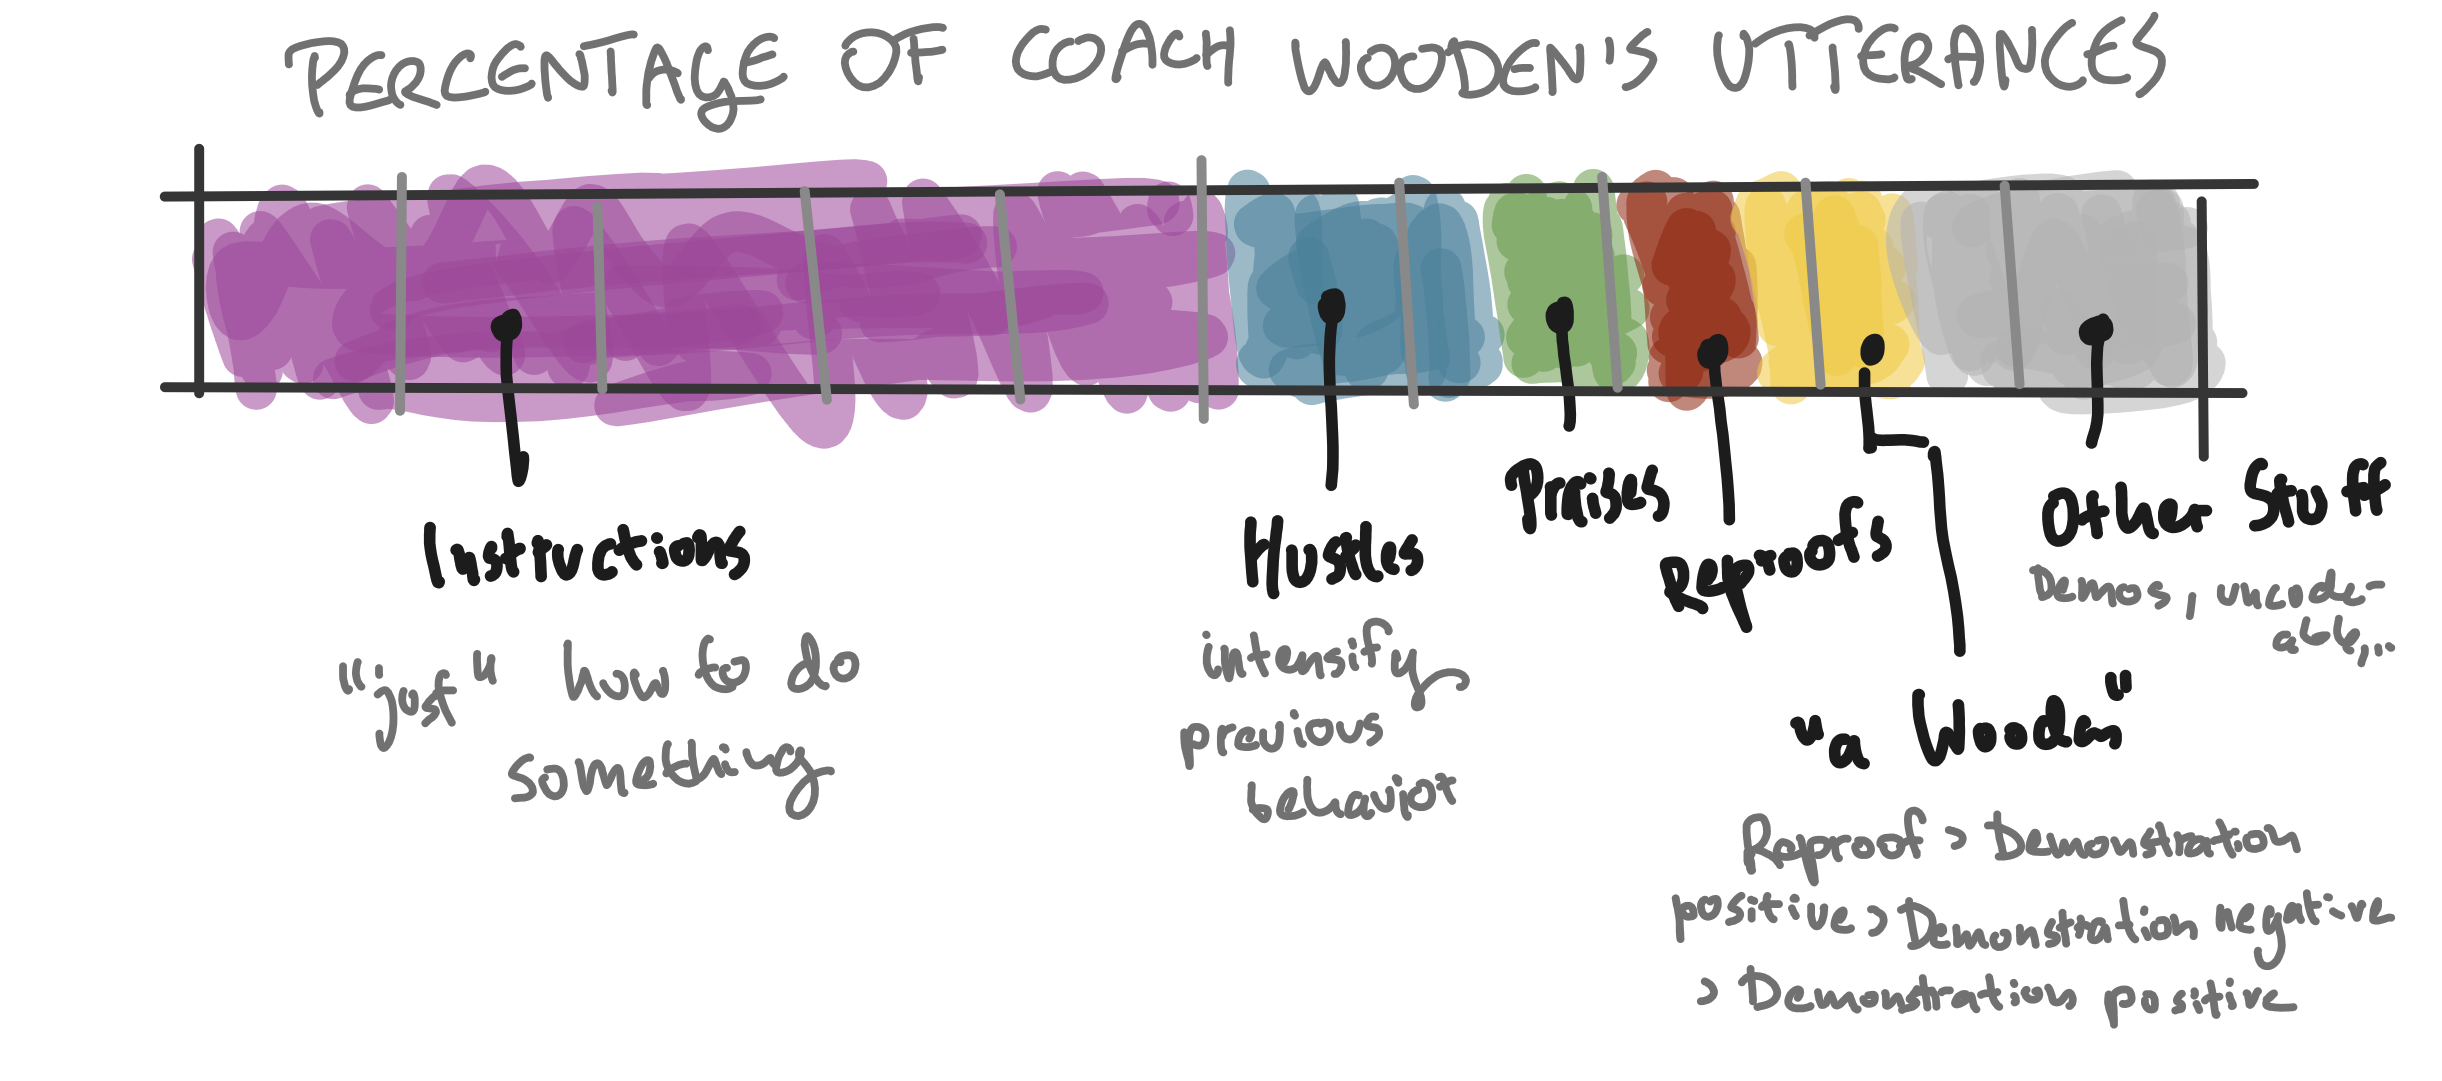 Sketched chart showing the percentages of different types of utterances by coach Wooden: Over 50% are instruction, 12% are 'hustles' intensifying previous behavior, praises and reproofs each account for 6%, and the 'Wooden', a sequence of reproof, positive modeling, negative modeling and positive modeling again has a share of about 8%.